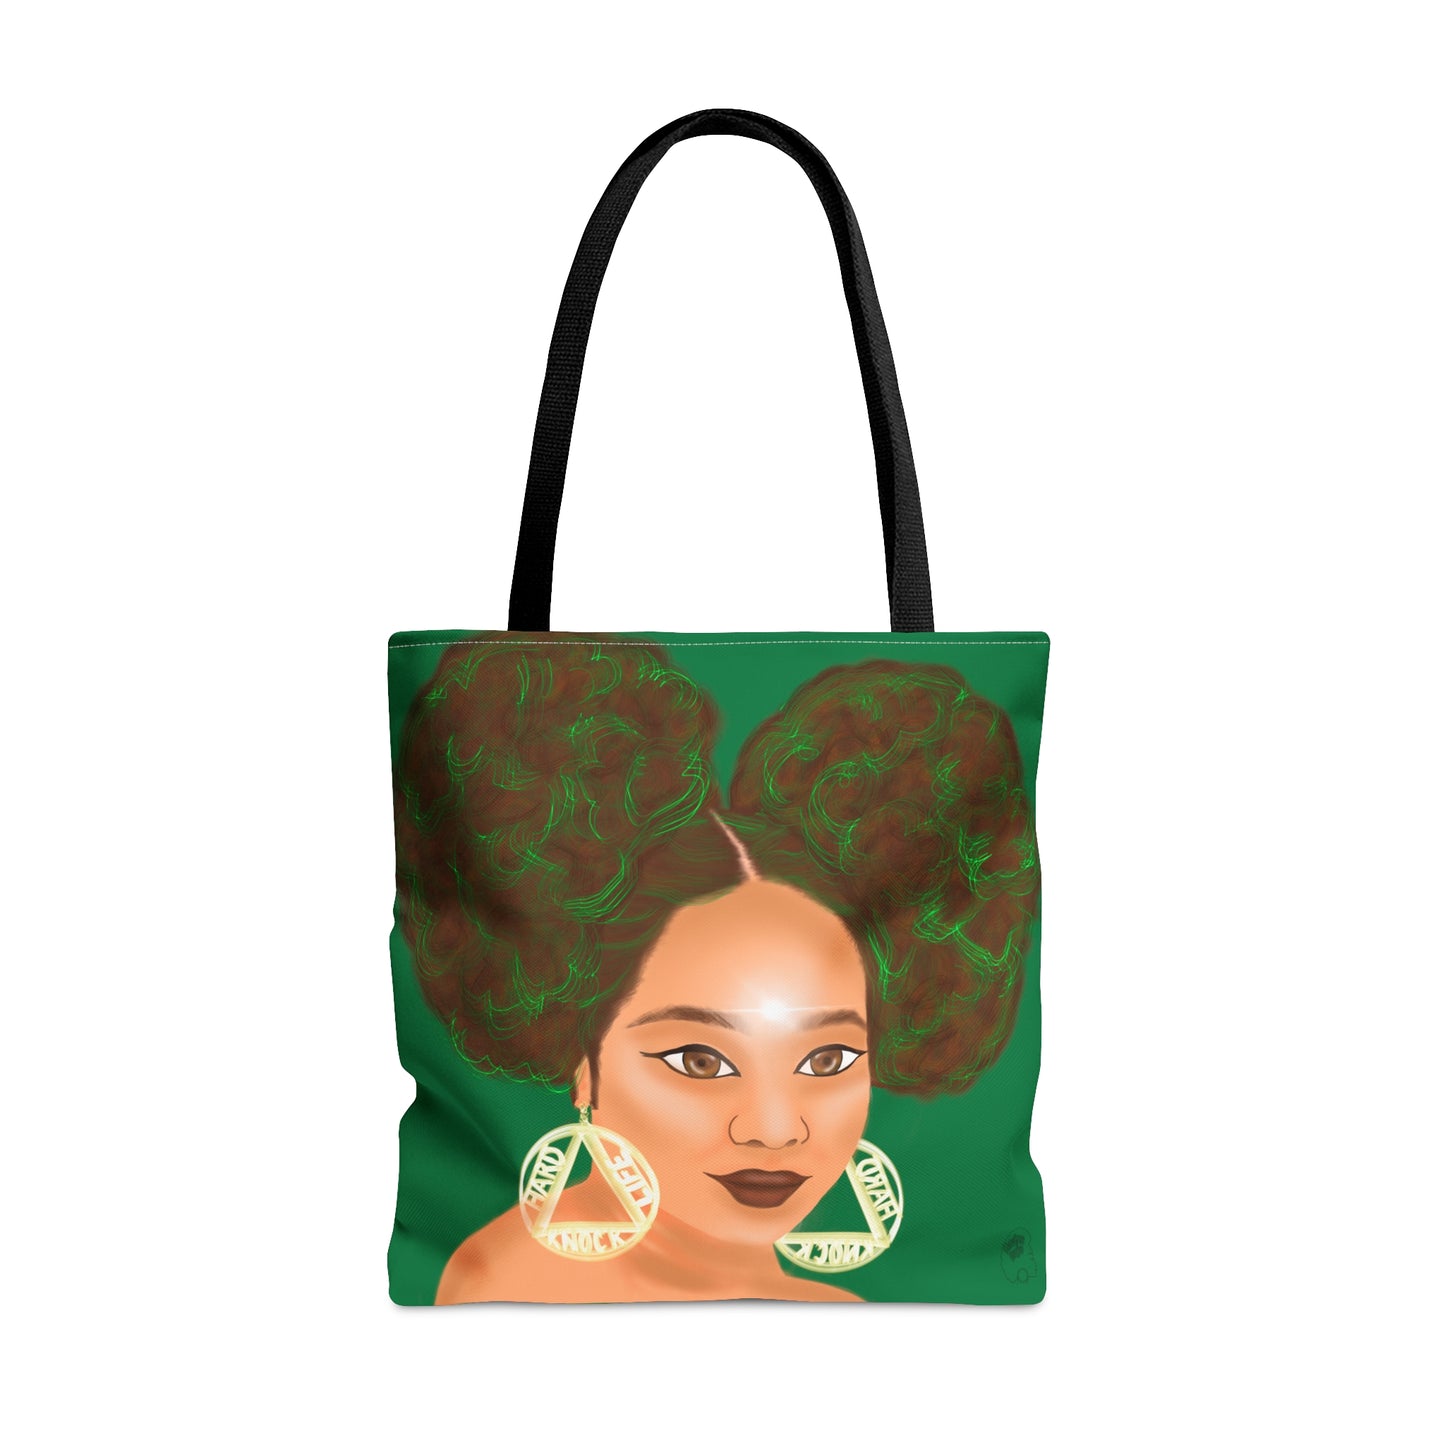 Jazzy Tote (inspired by Jay-Z)